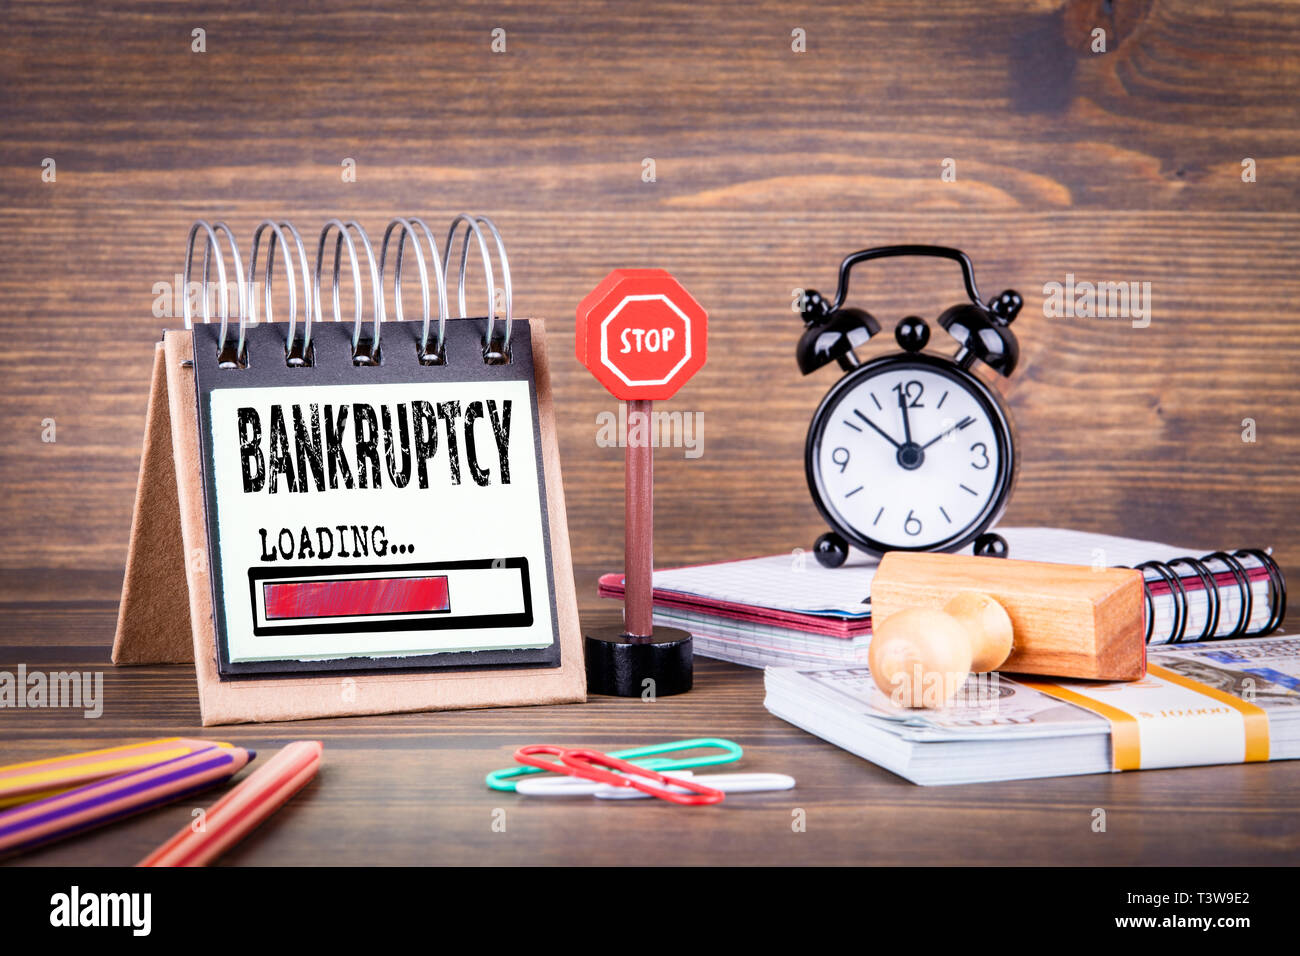 Bankruptcy loading concept Stock Photo